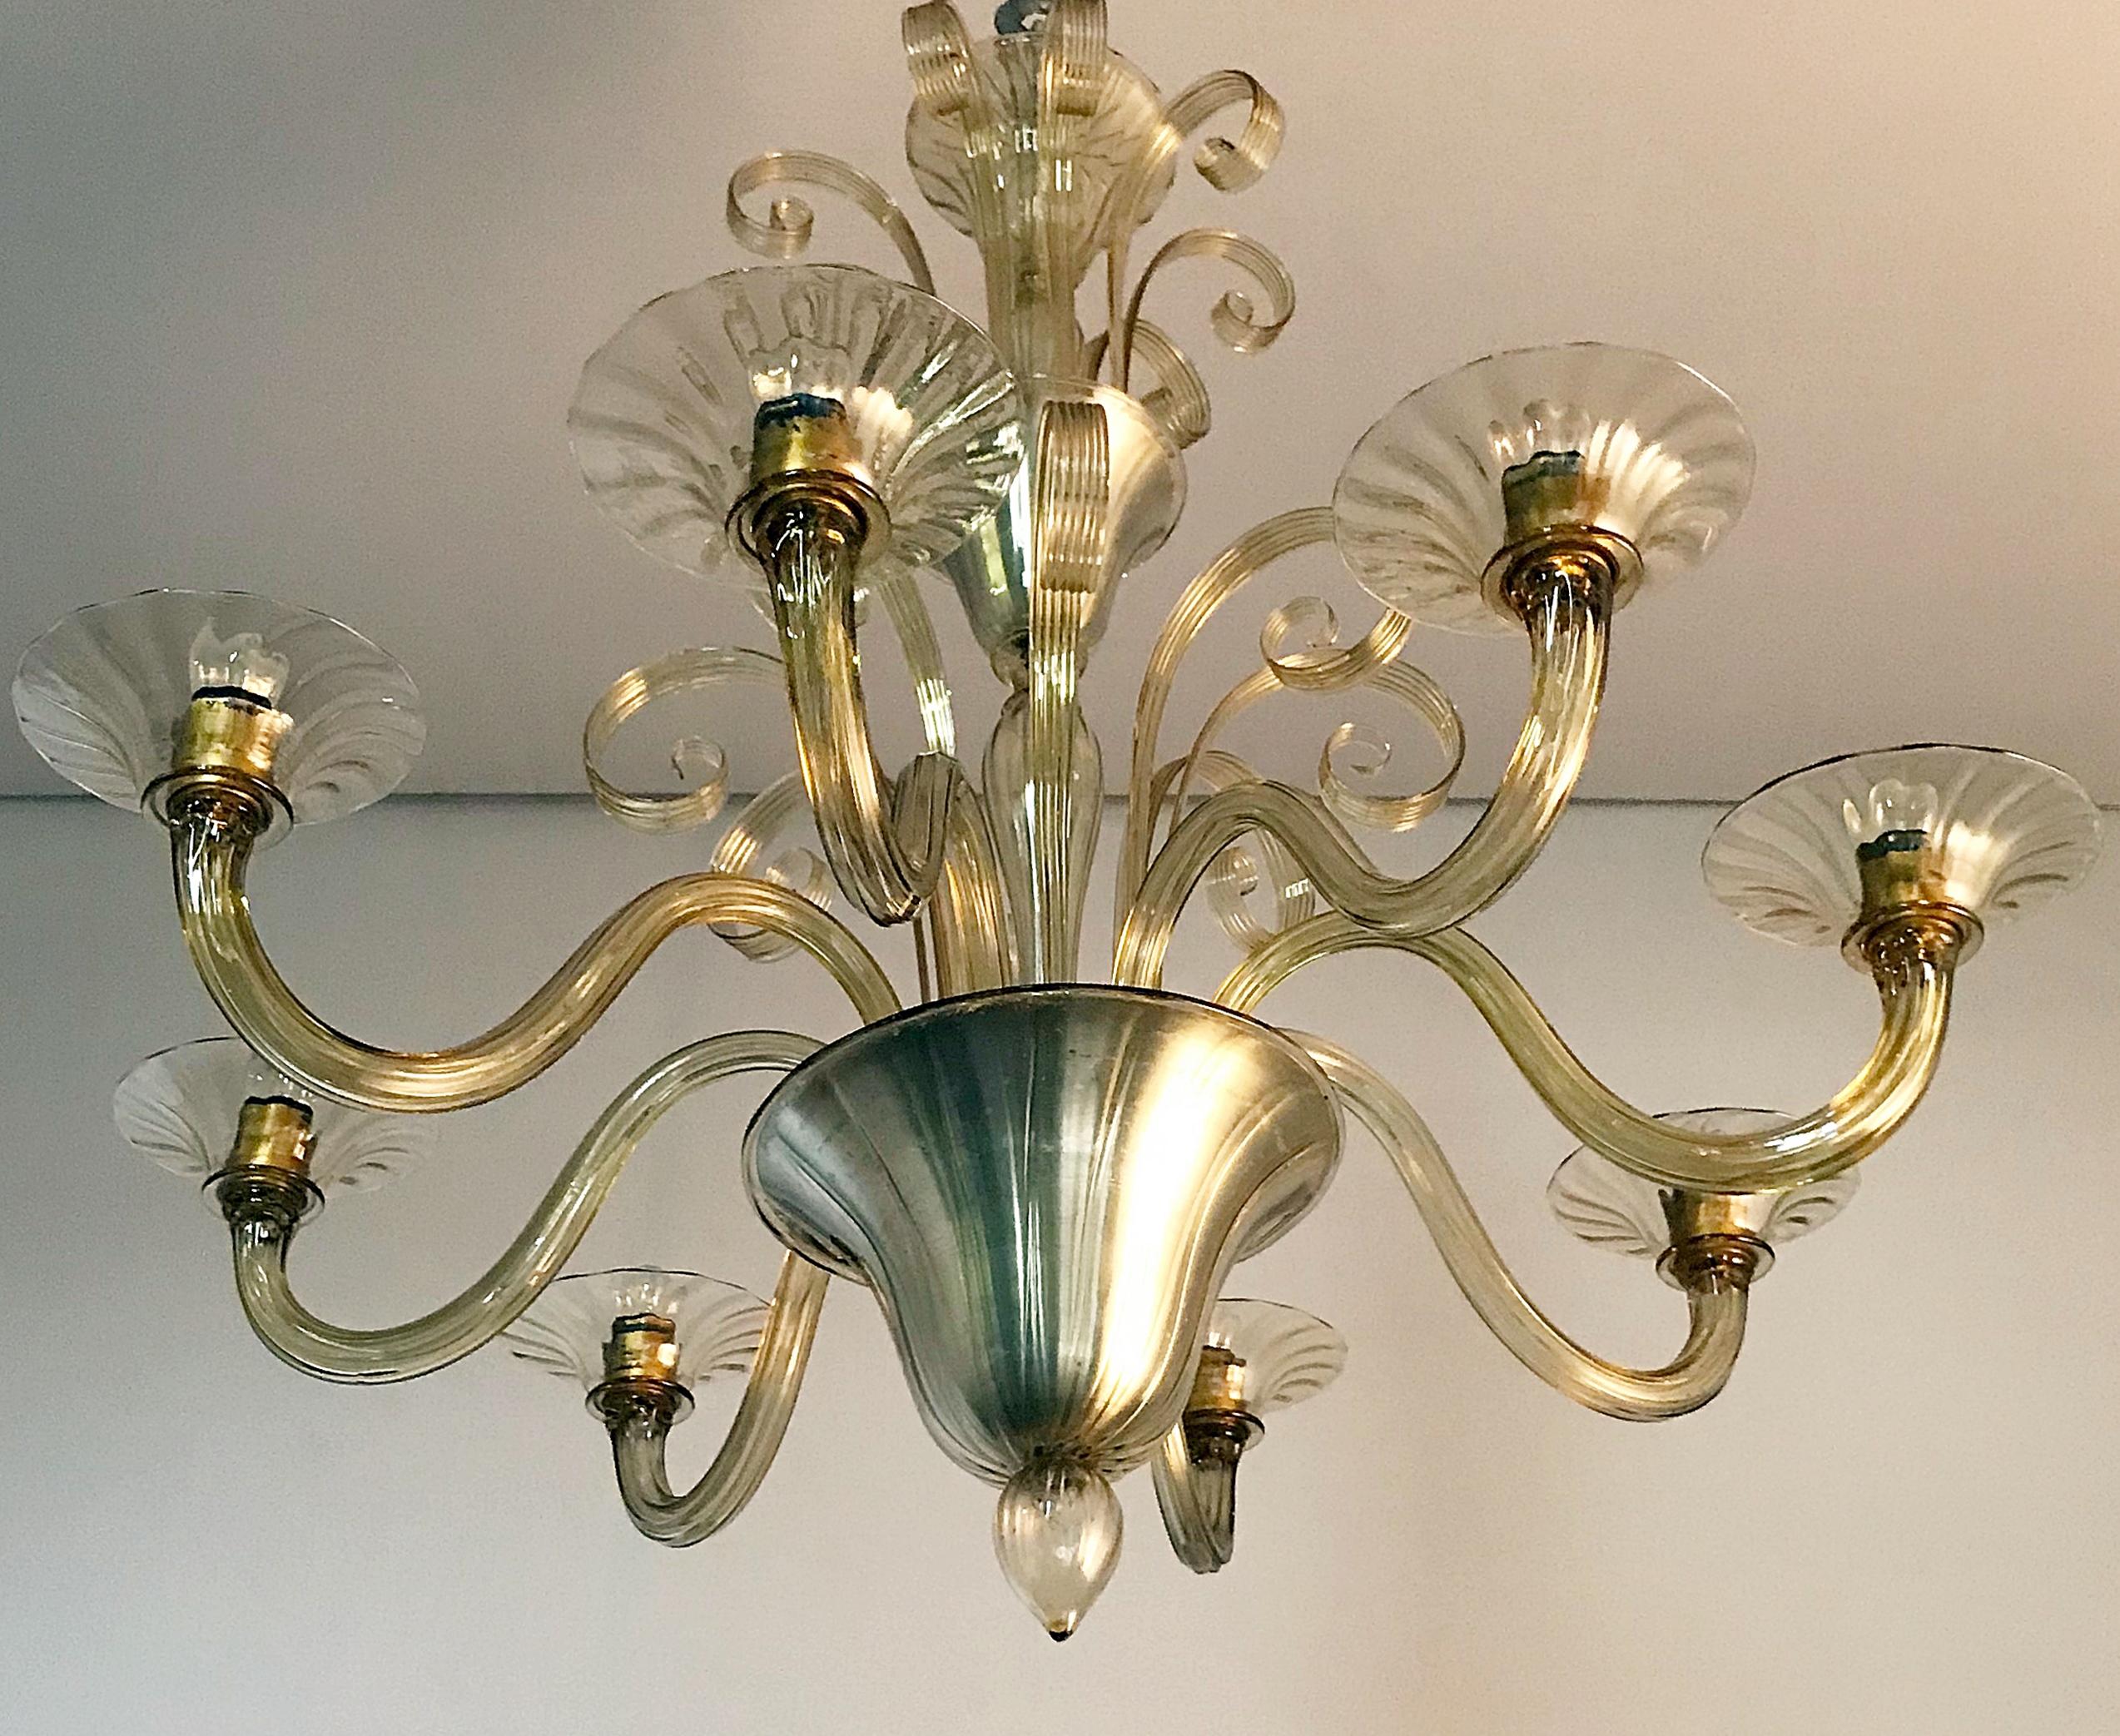 Venetian chandelier - eight arms of lights - Electrification has been restored. The whole come from a Brussel's restaurant which has been destroyed since 1958.
Two pairs available - Possibility to buy just one piece.
 